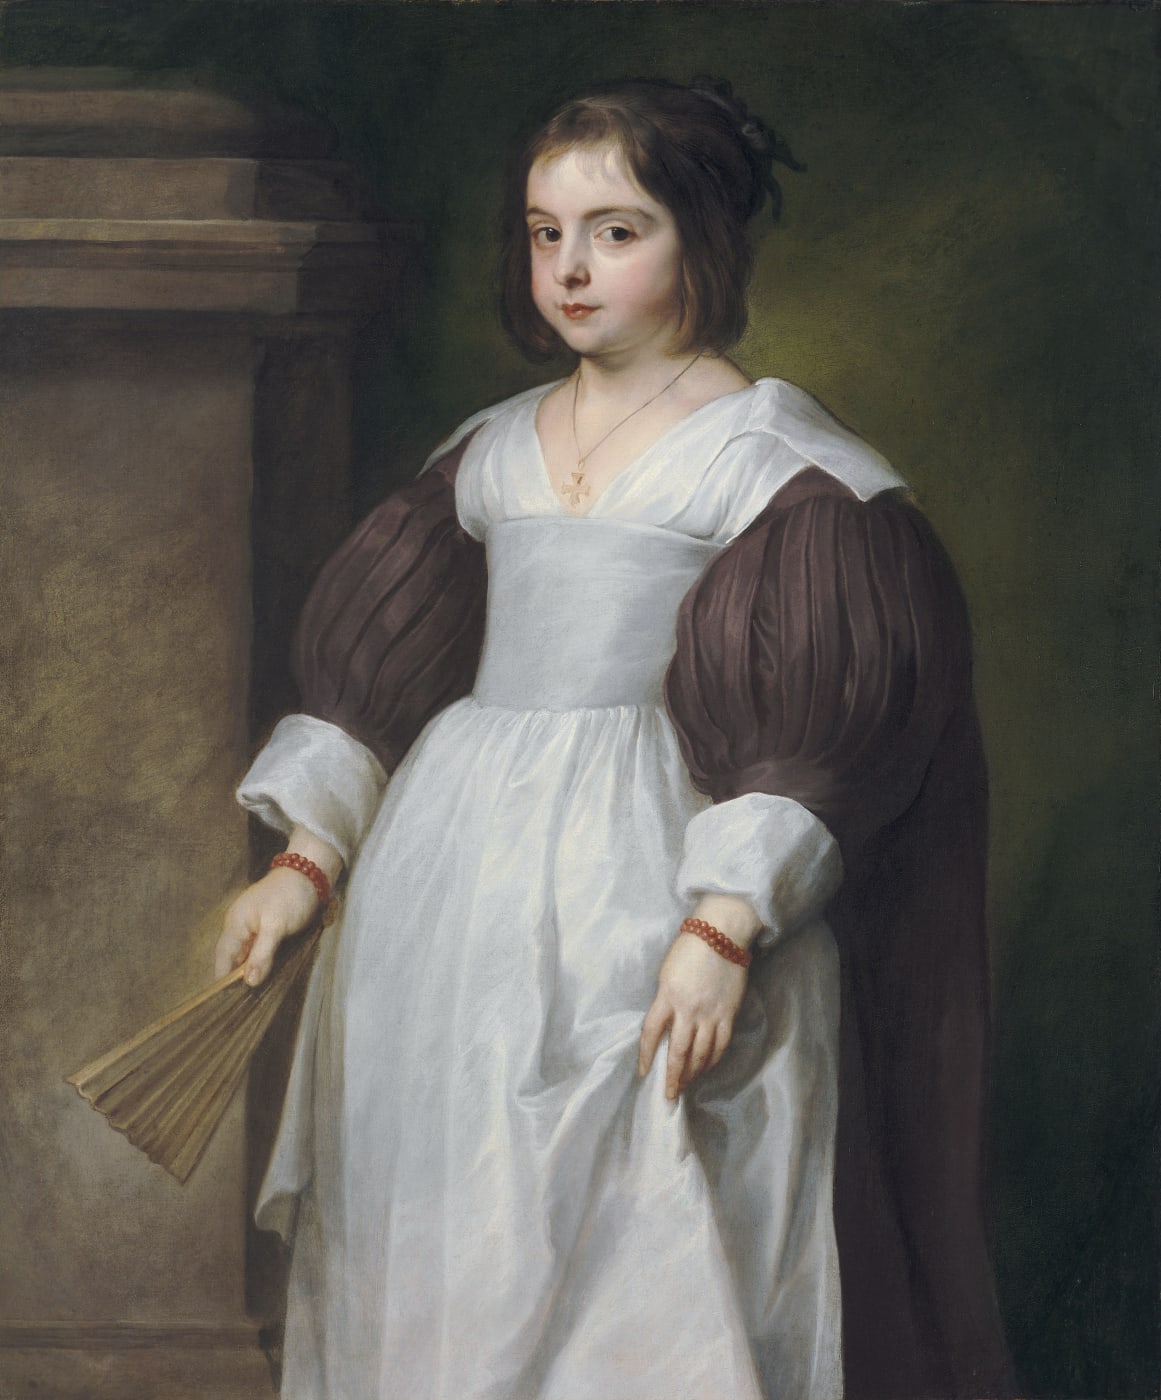 An exquisite, recently restored portrait of a young girl in a white and brown dress by famous artist Sir Anthony Van Dyck. This portrait is currently for sale, for other Old Master portraits for sale go to our artworks or artist pages.